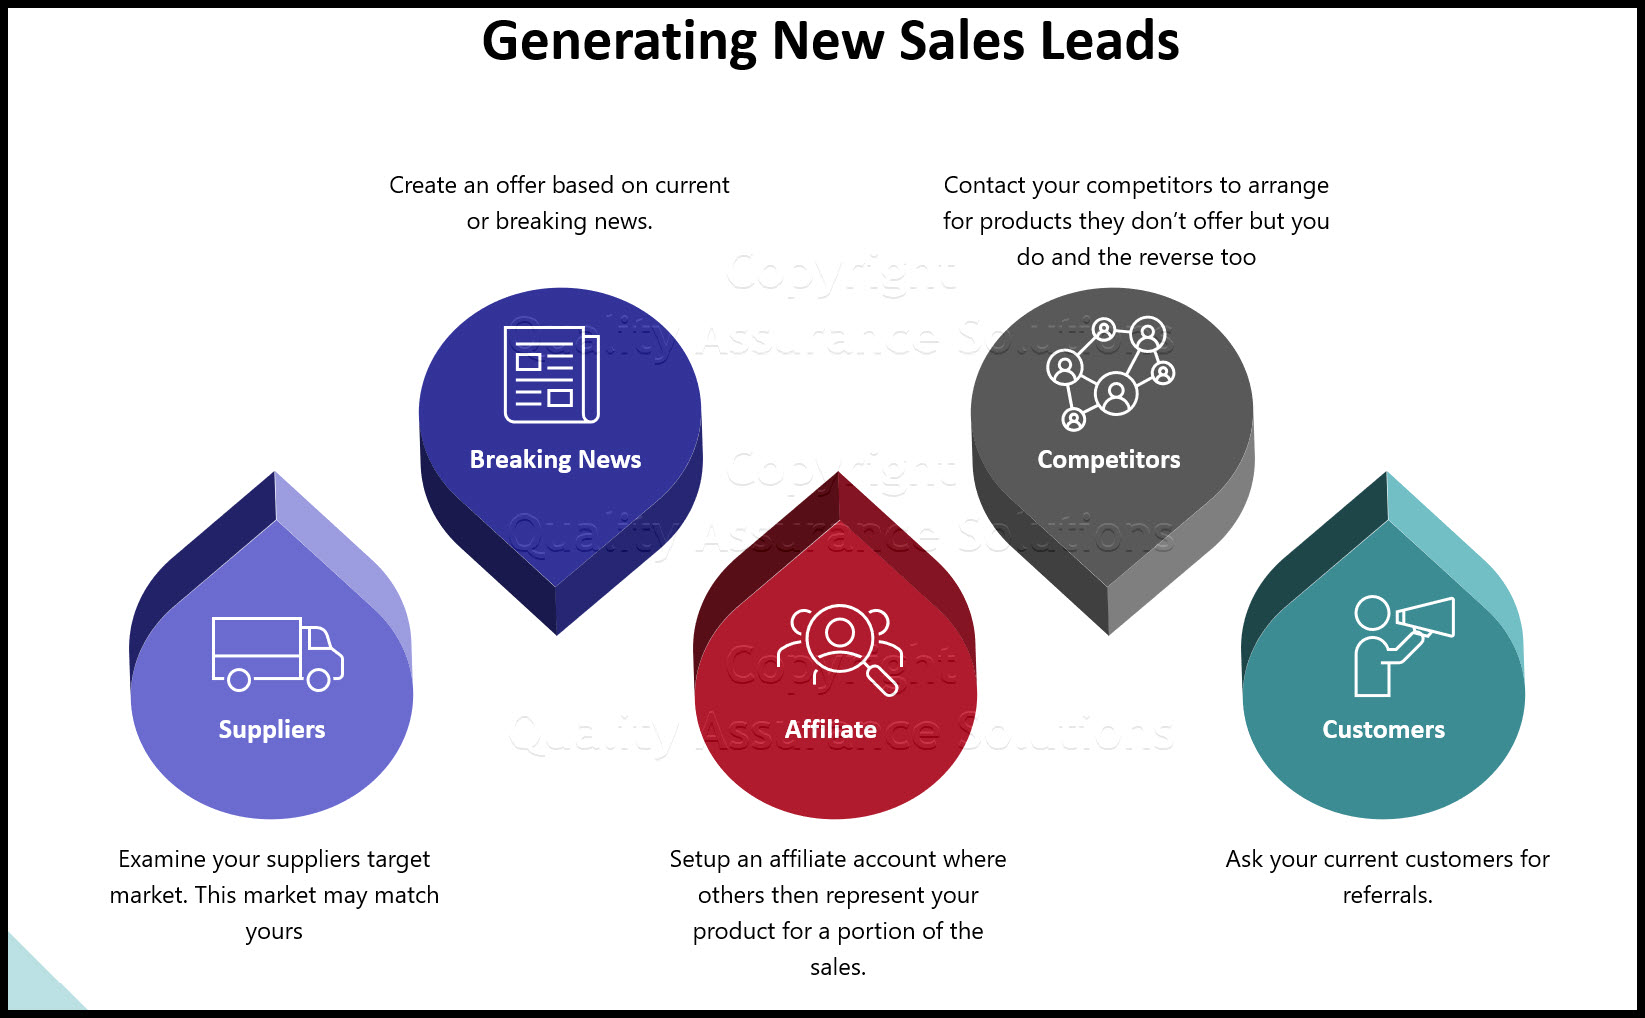 Amplify new business sales leads. Discover multiple approaches to grow your business.